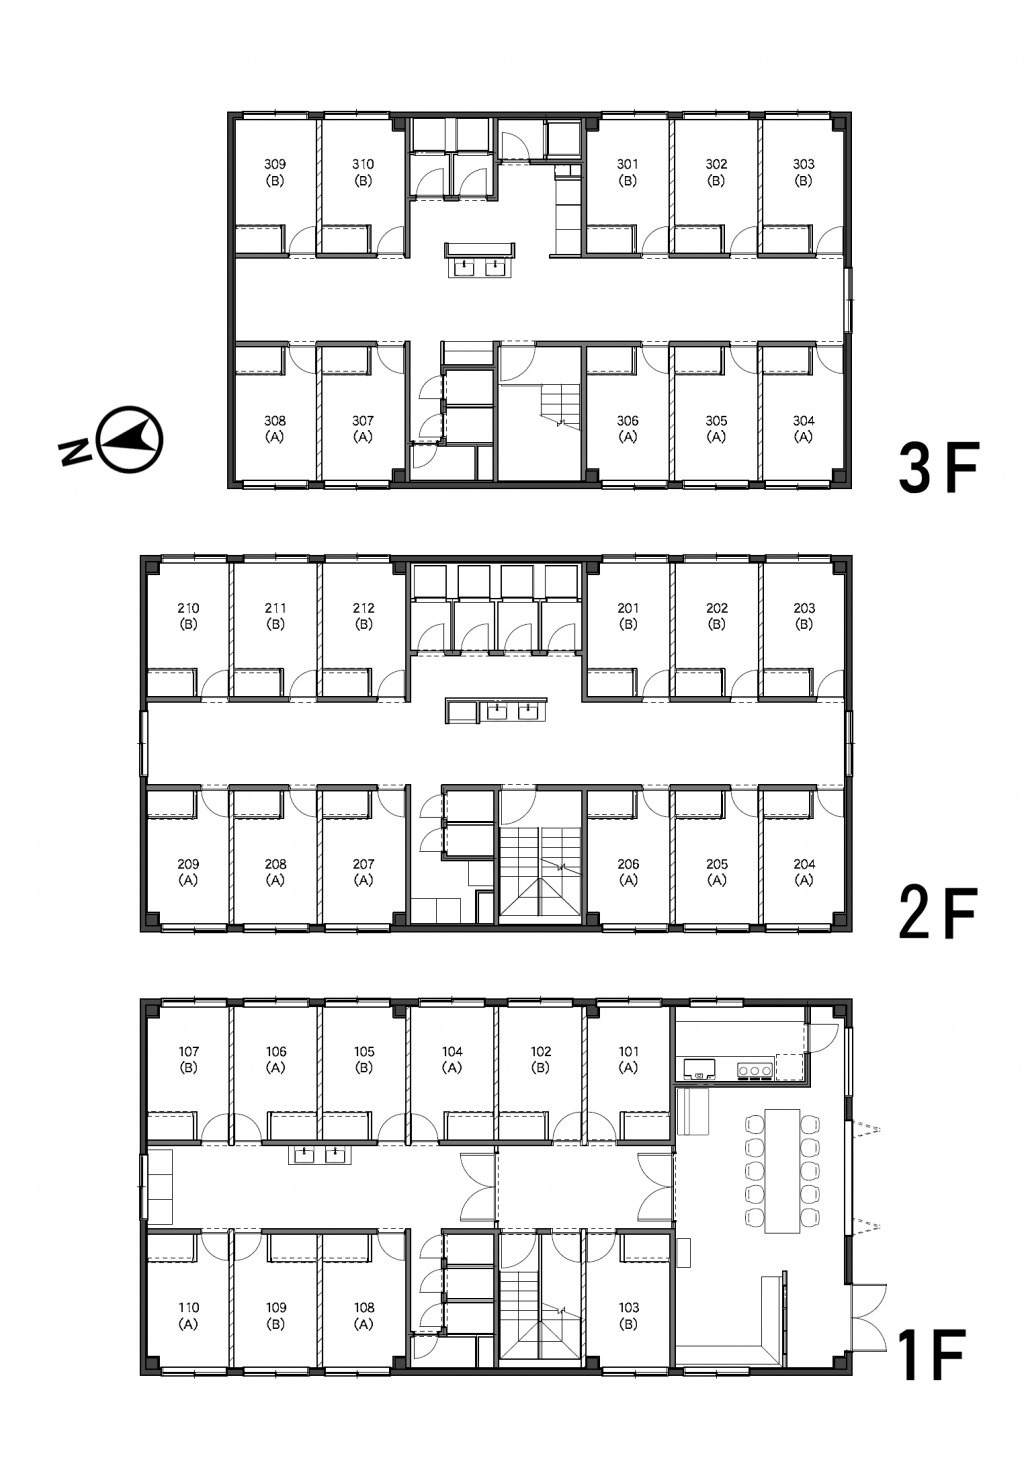 Floorplan (The first and second floor are male and female mixed floor, the third floor is for women only.)